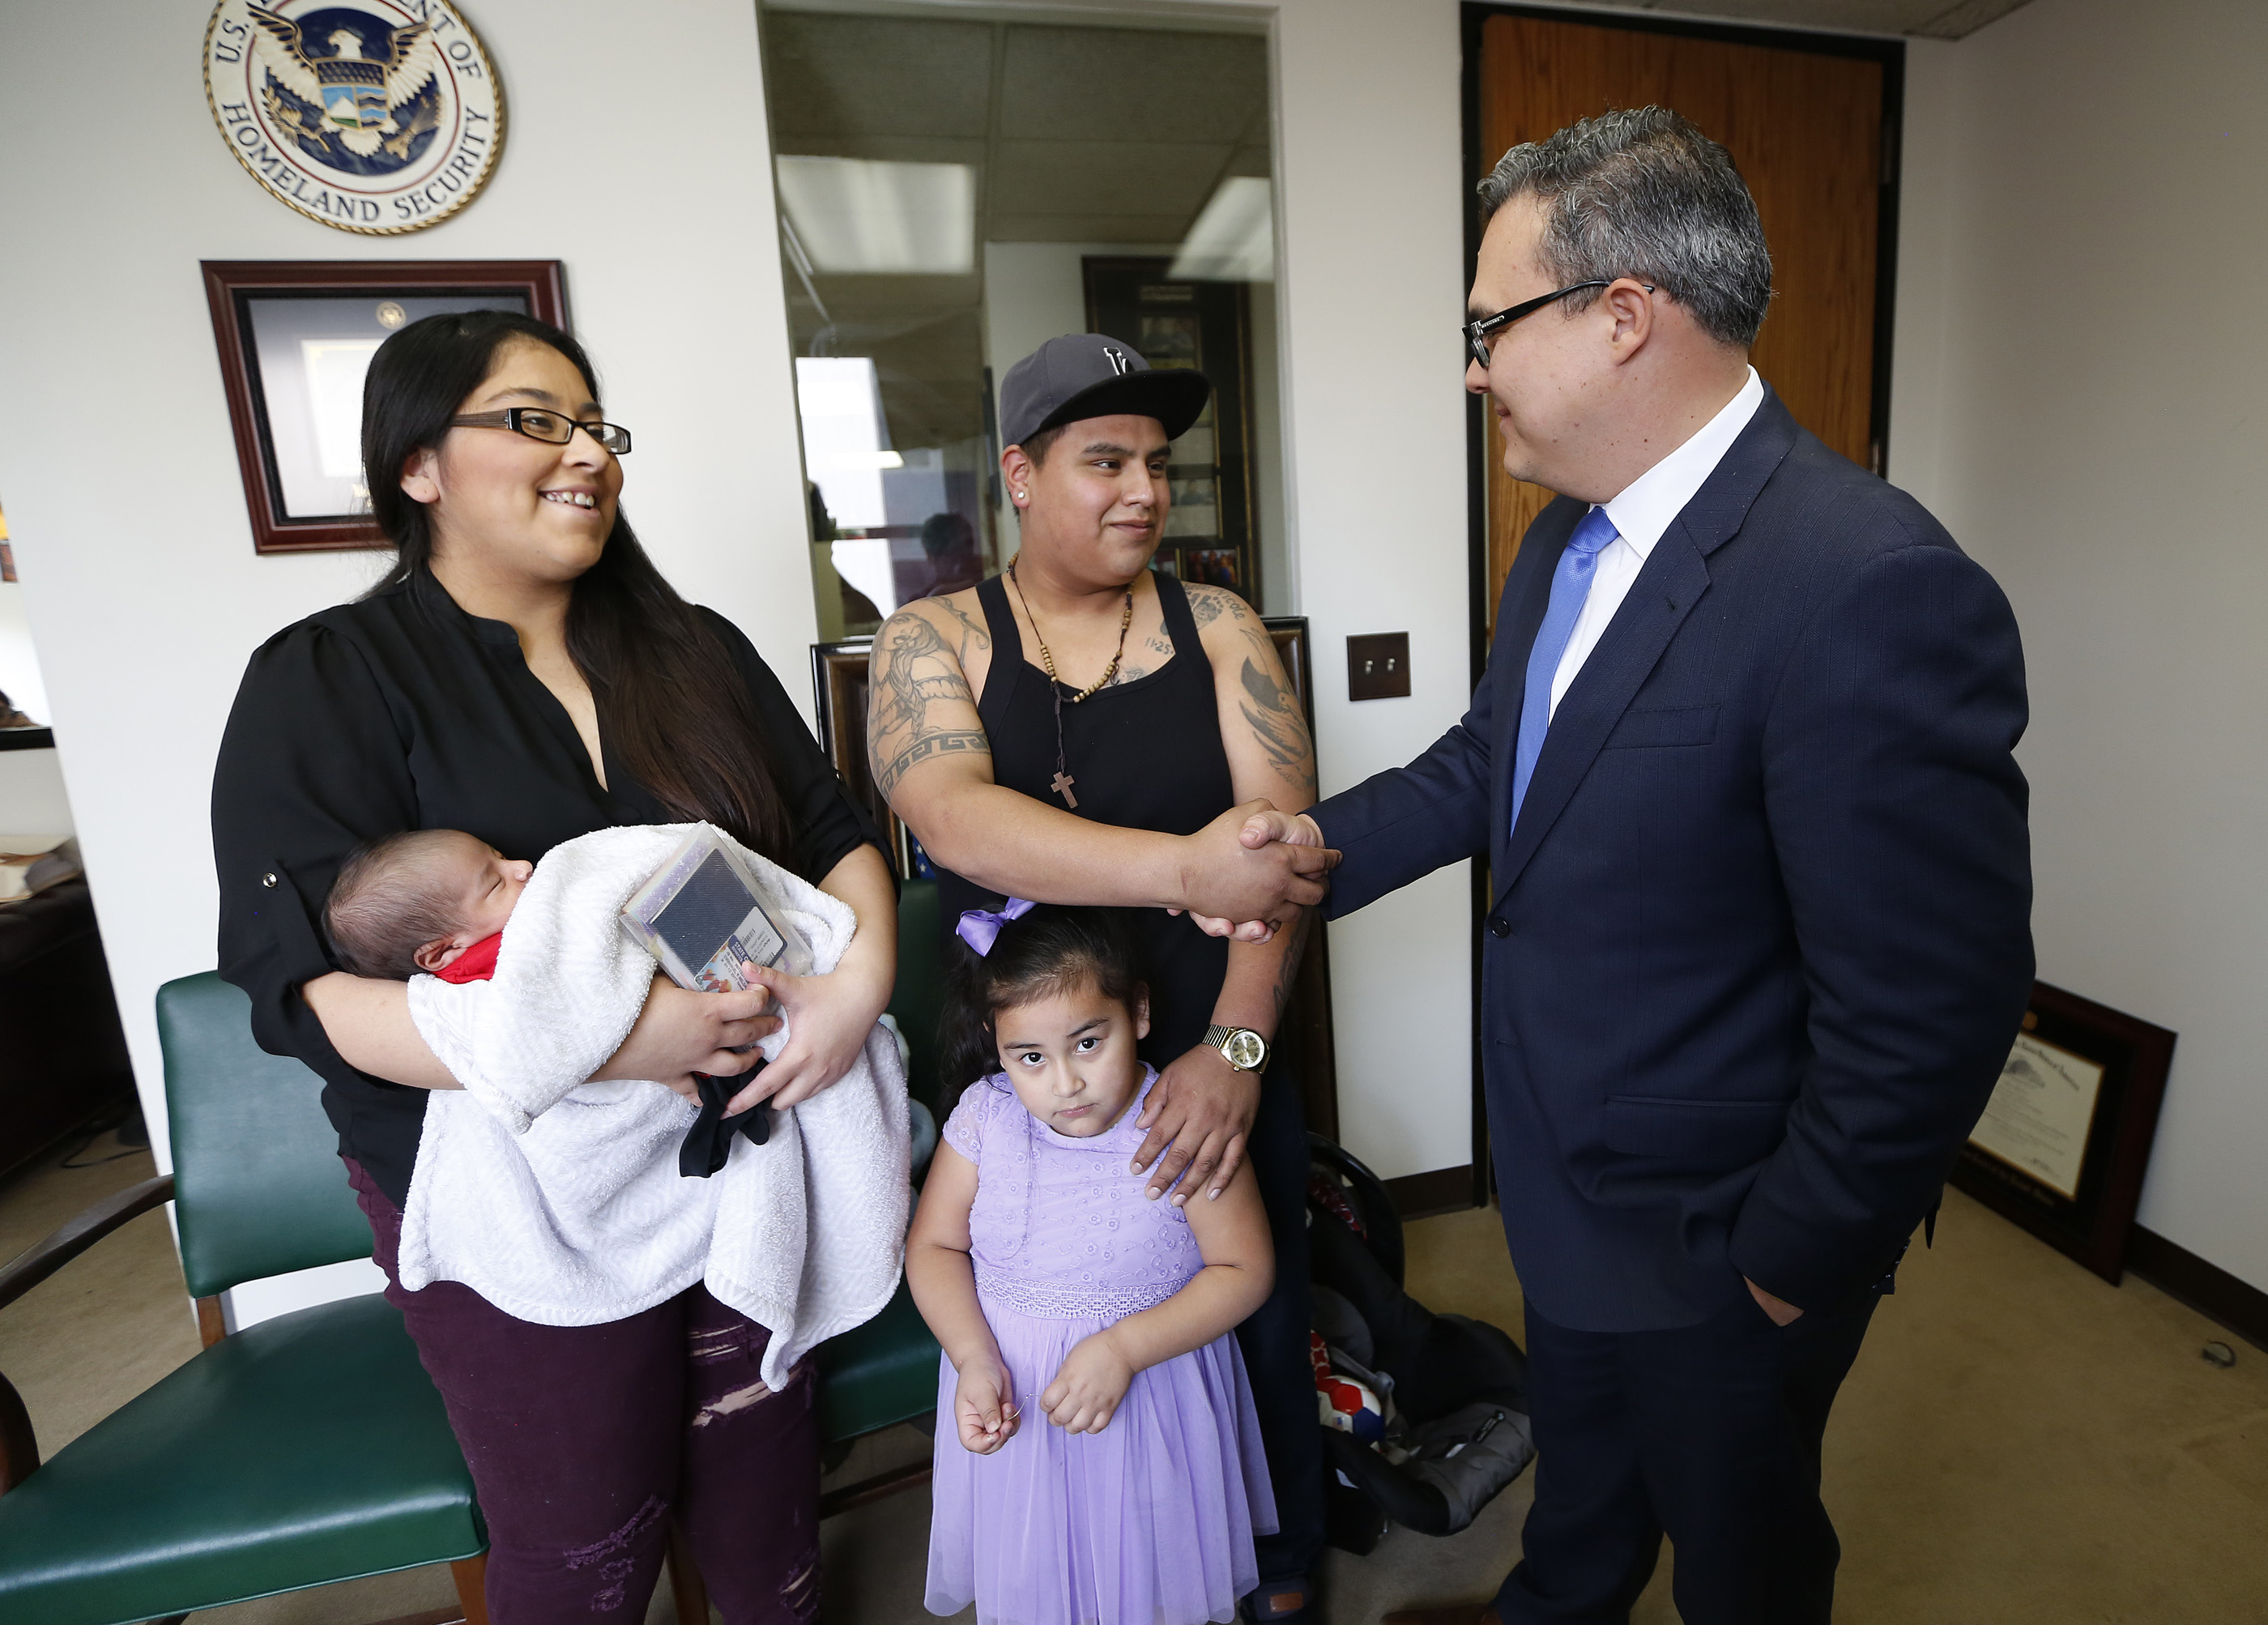 02/02/17/ LOS ANGELES/Marcos Melgar Cruz, with his wife Lorena and children, Isabella, 4, Anthony, 2, and Emanuel, 3 weeks old, discusses his immigration status during their visit to their attorneys office, Alex Galvez. (Photo Aurelia Ventura/ La Opinion)